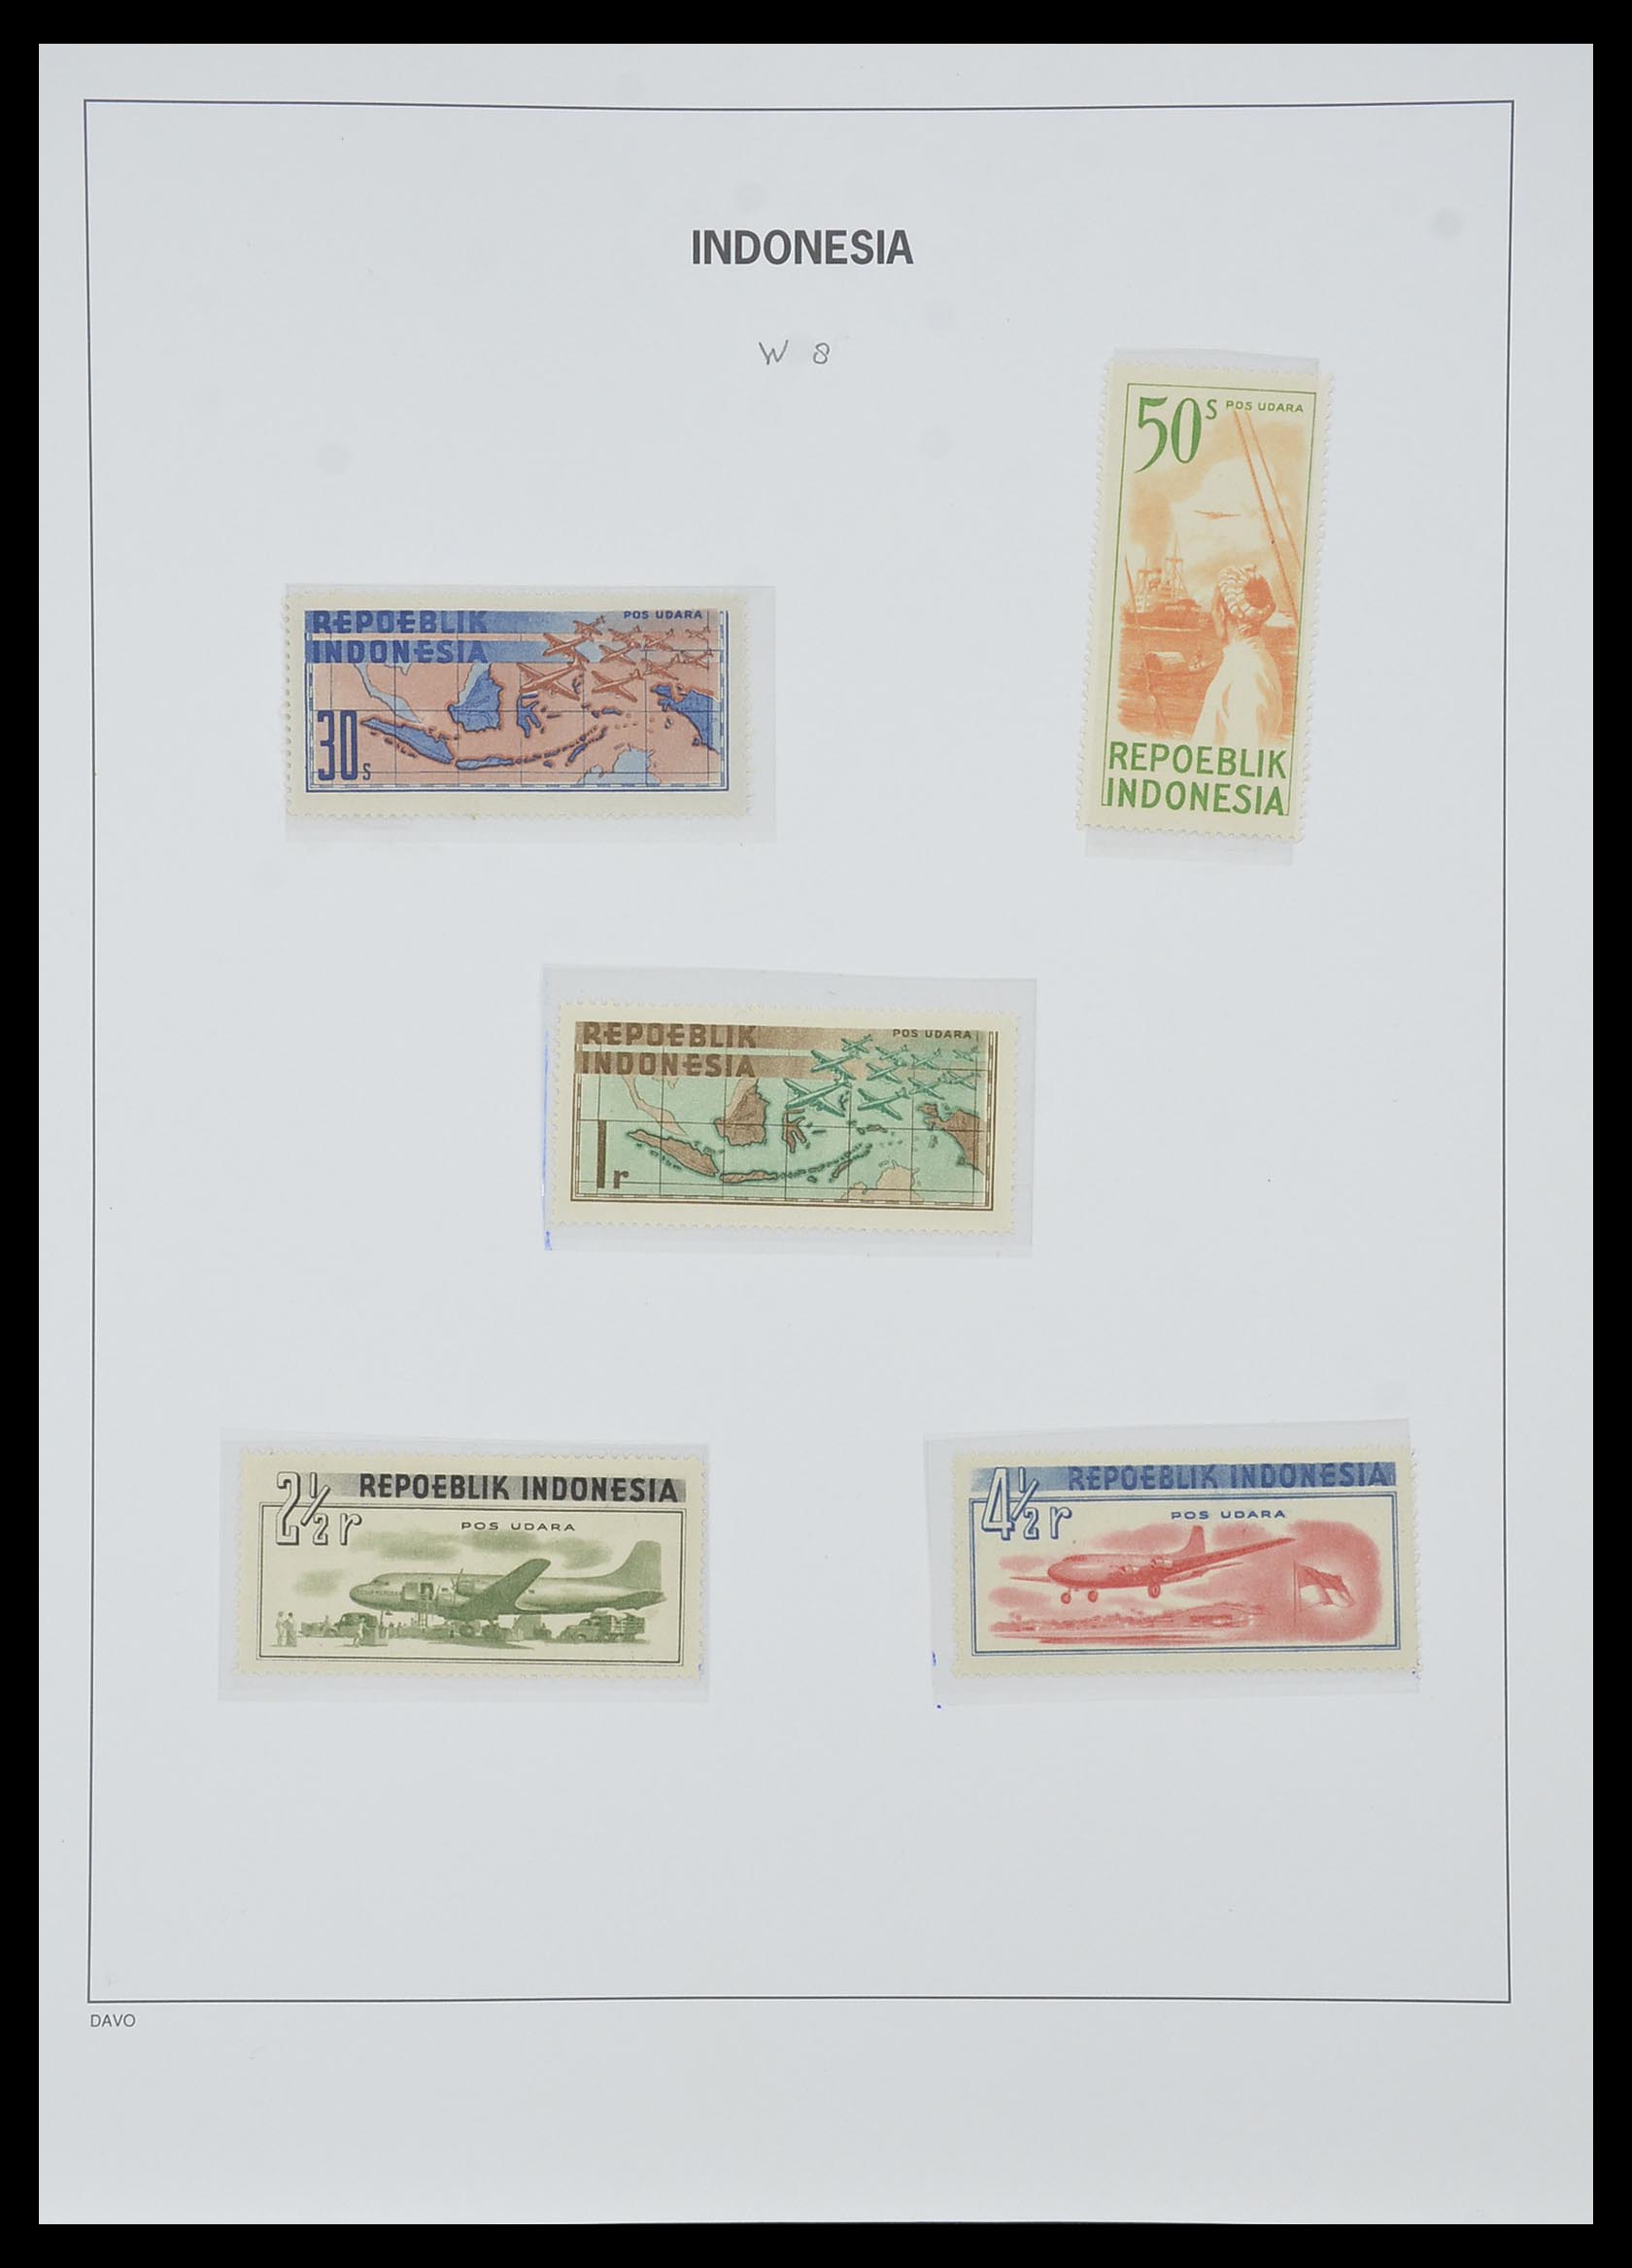 33988 017 - Stamp collection 33988 Vienna printings Indonesia.